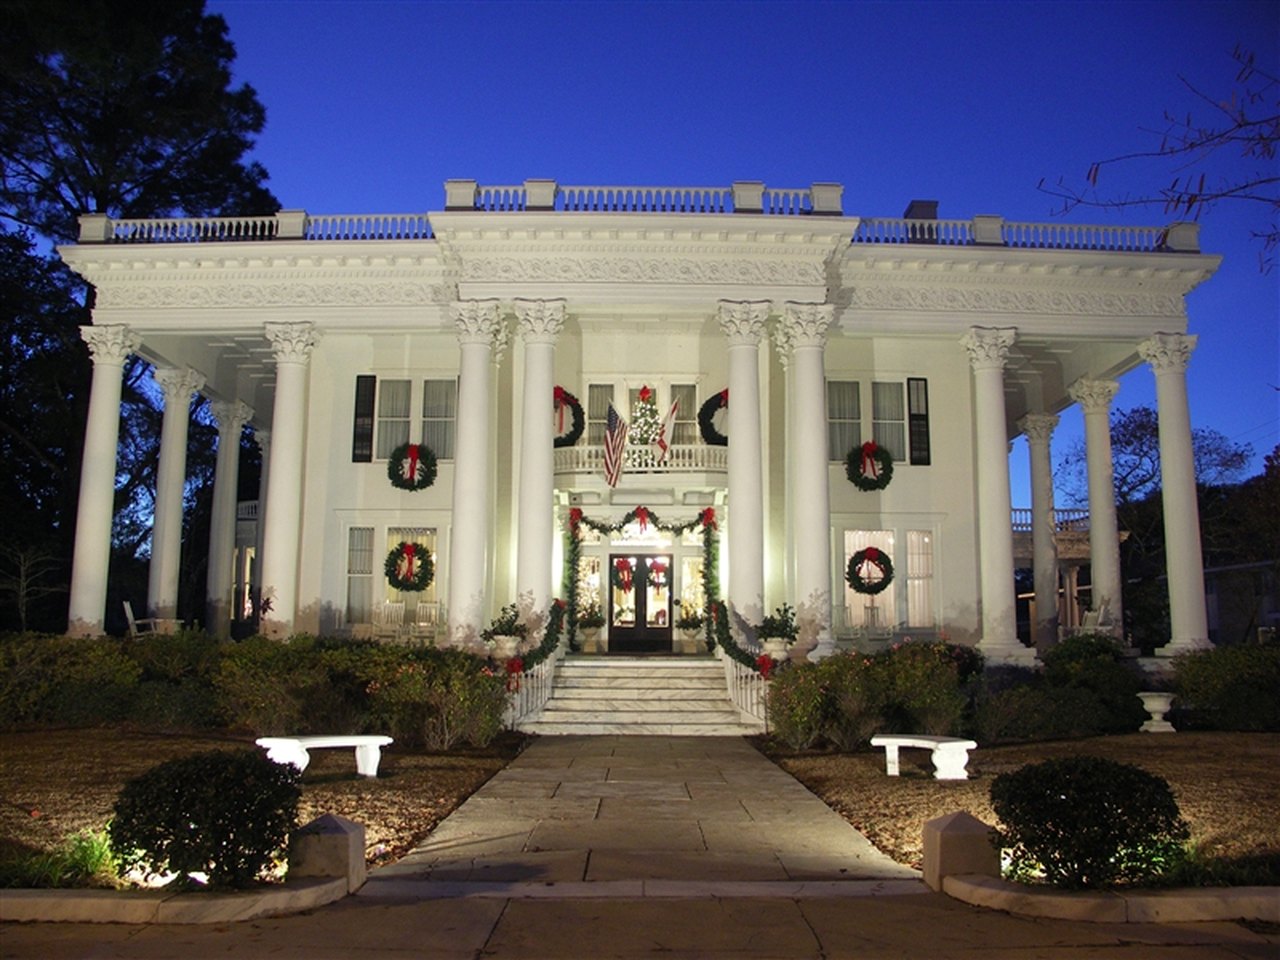 Eufaula Christmas Tour Of Homes In Alabama Fills You With Cheer